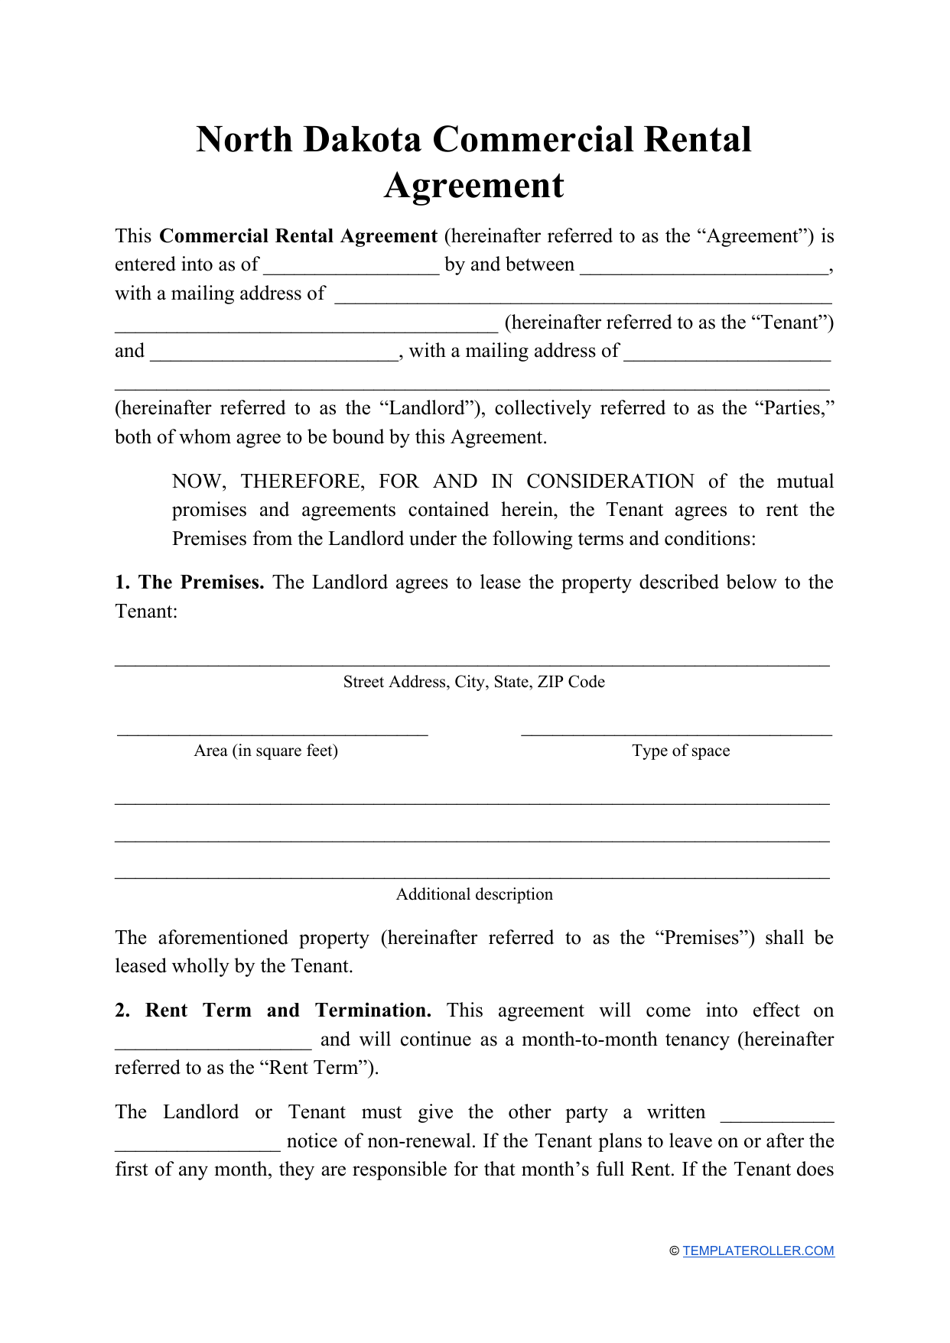 Commercial Rental Agreement Template - North Dakota, Page 1